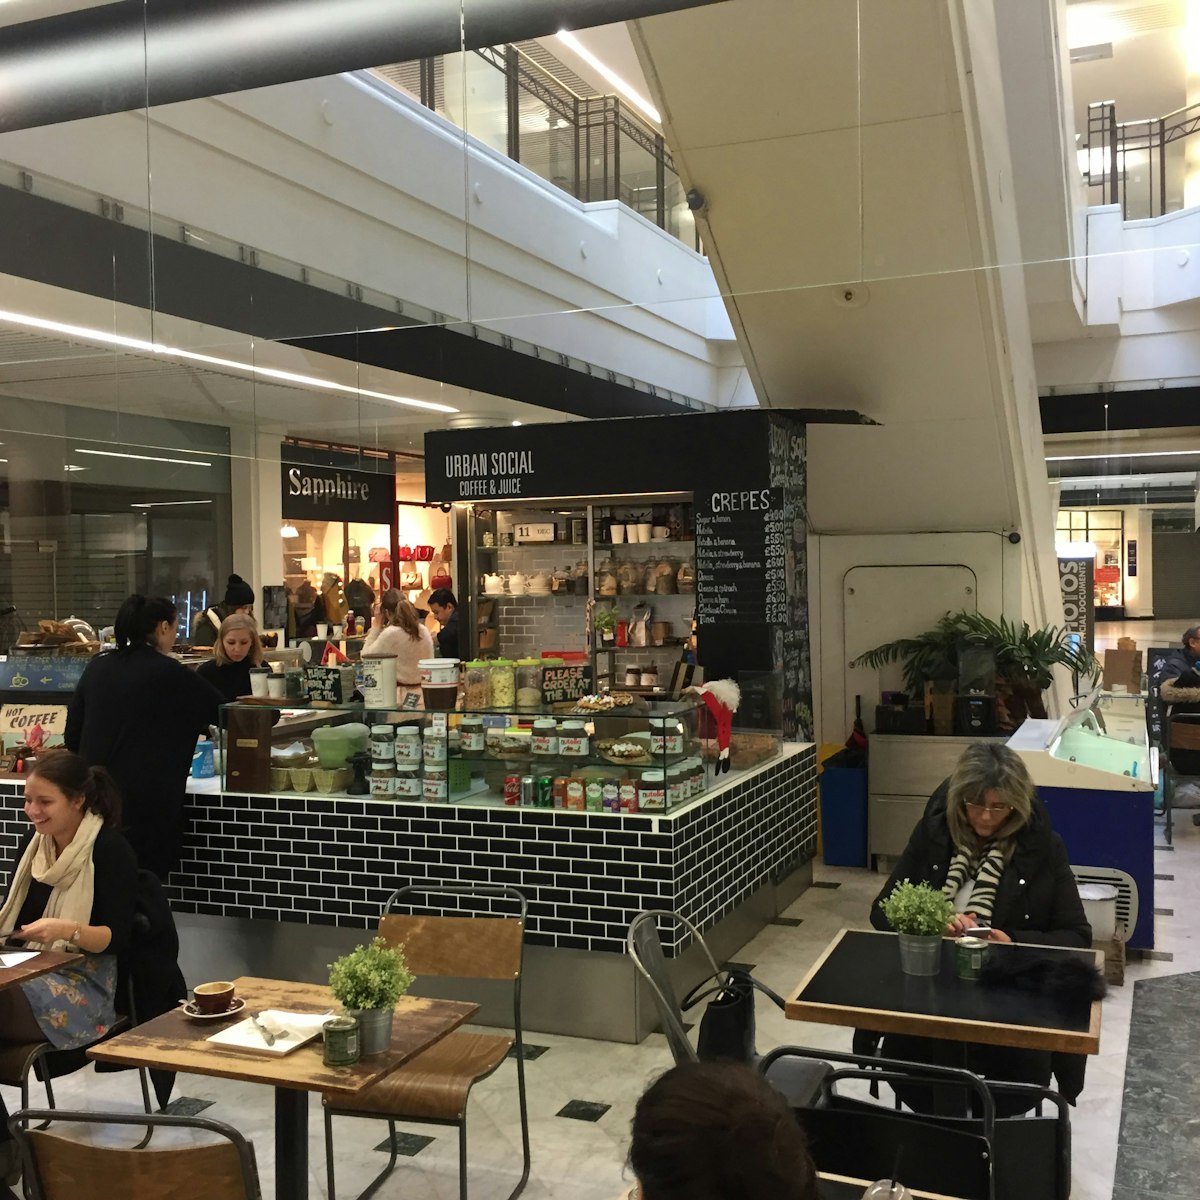 Urban Social cafe in the Whiteleys shopping centre in Bayswater